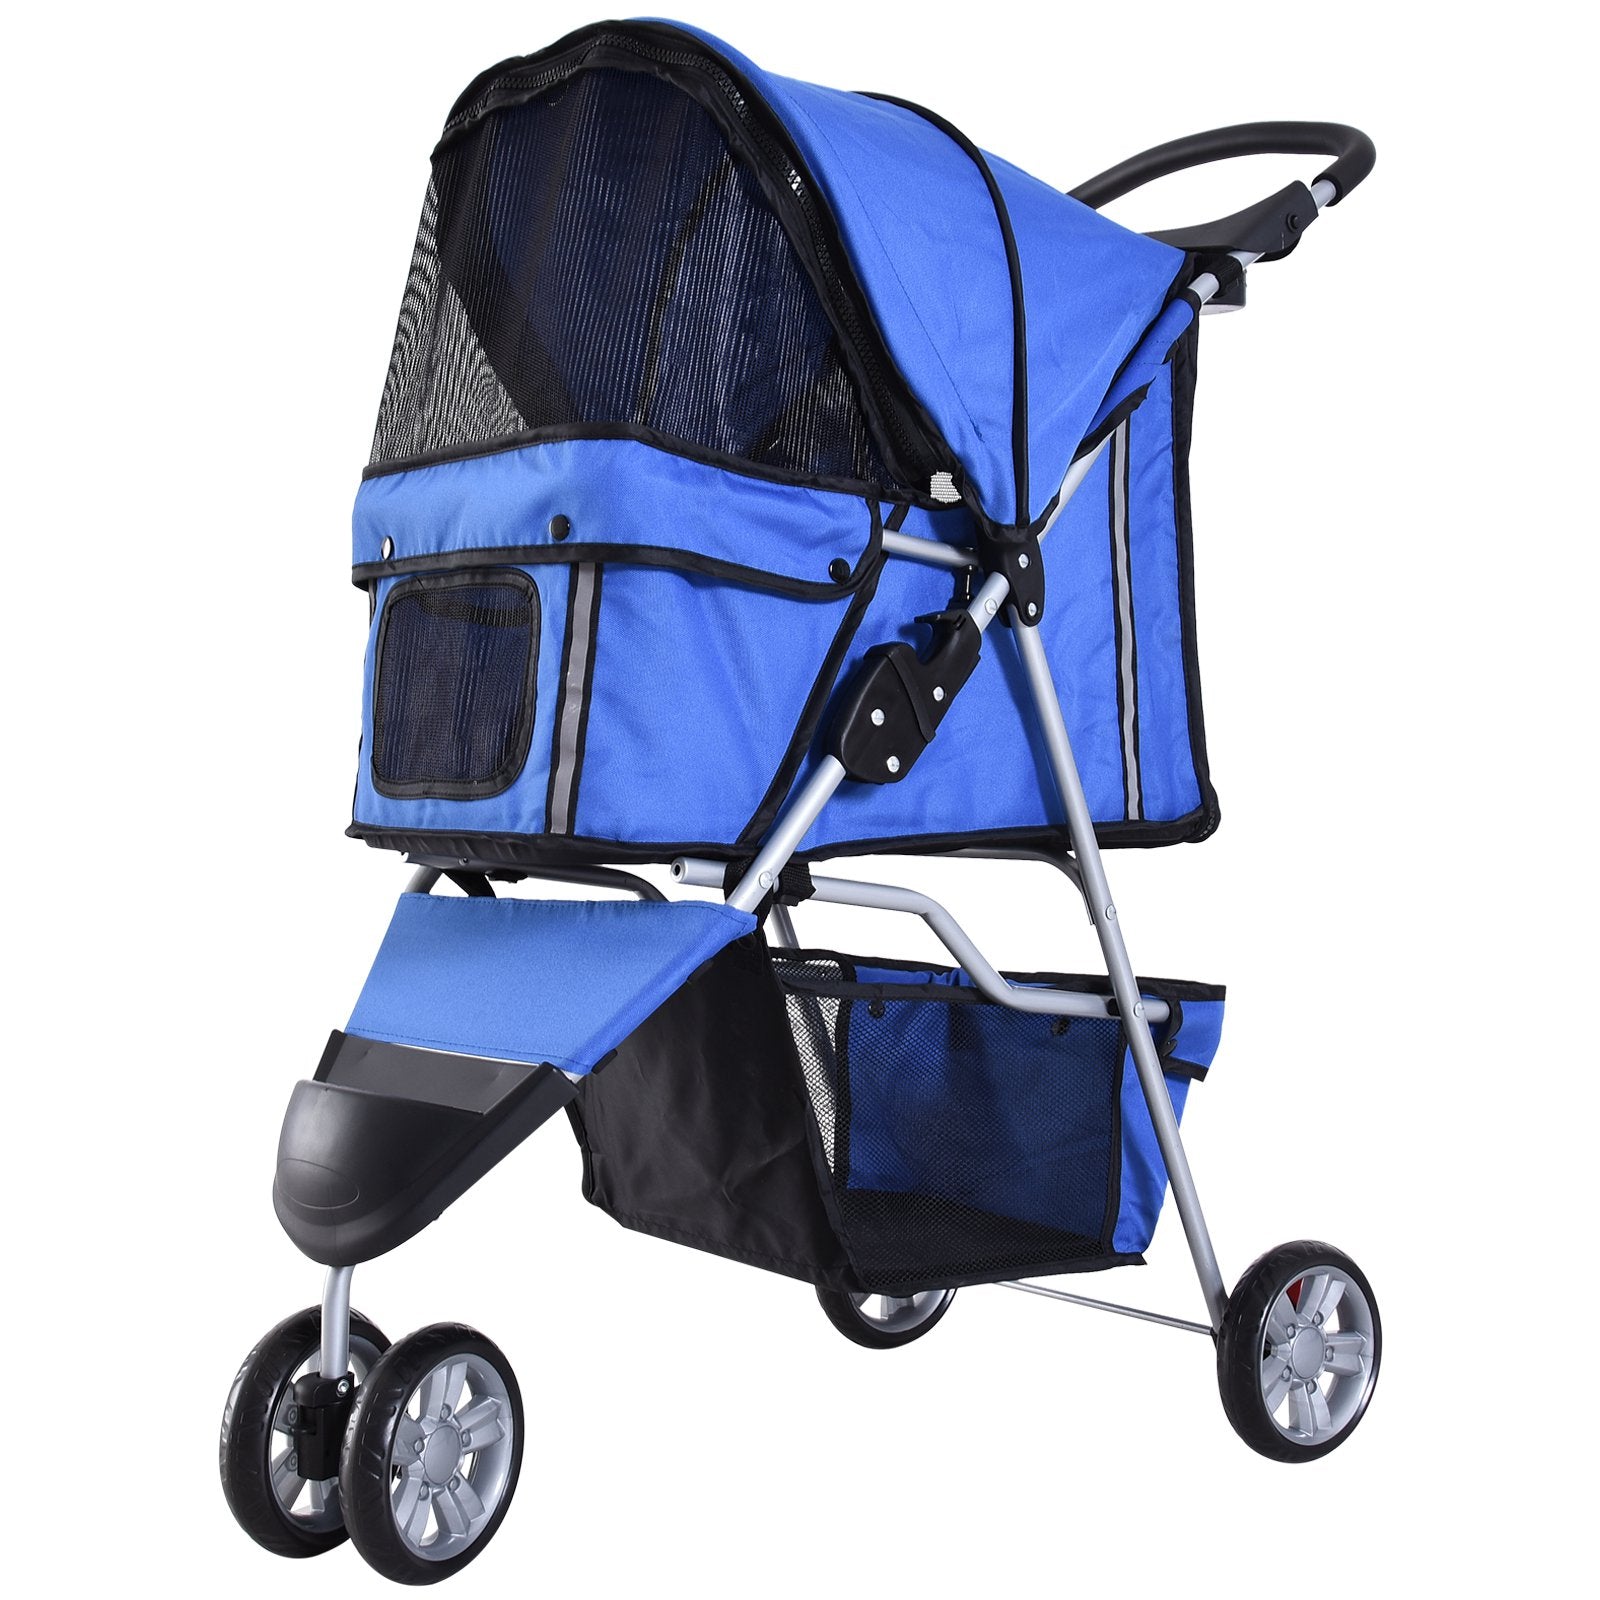 Dogs Oxford Cloth Three Wheel Pram Blue - Suitable for Small Pets